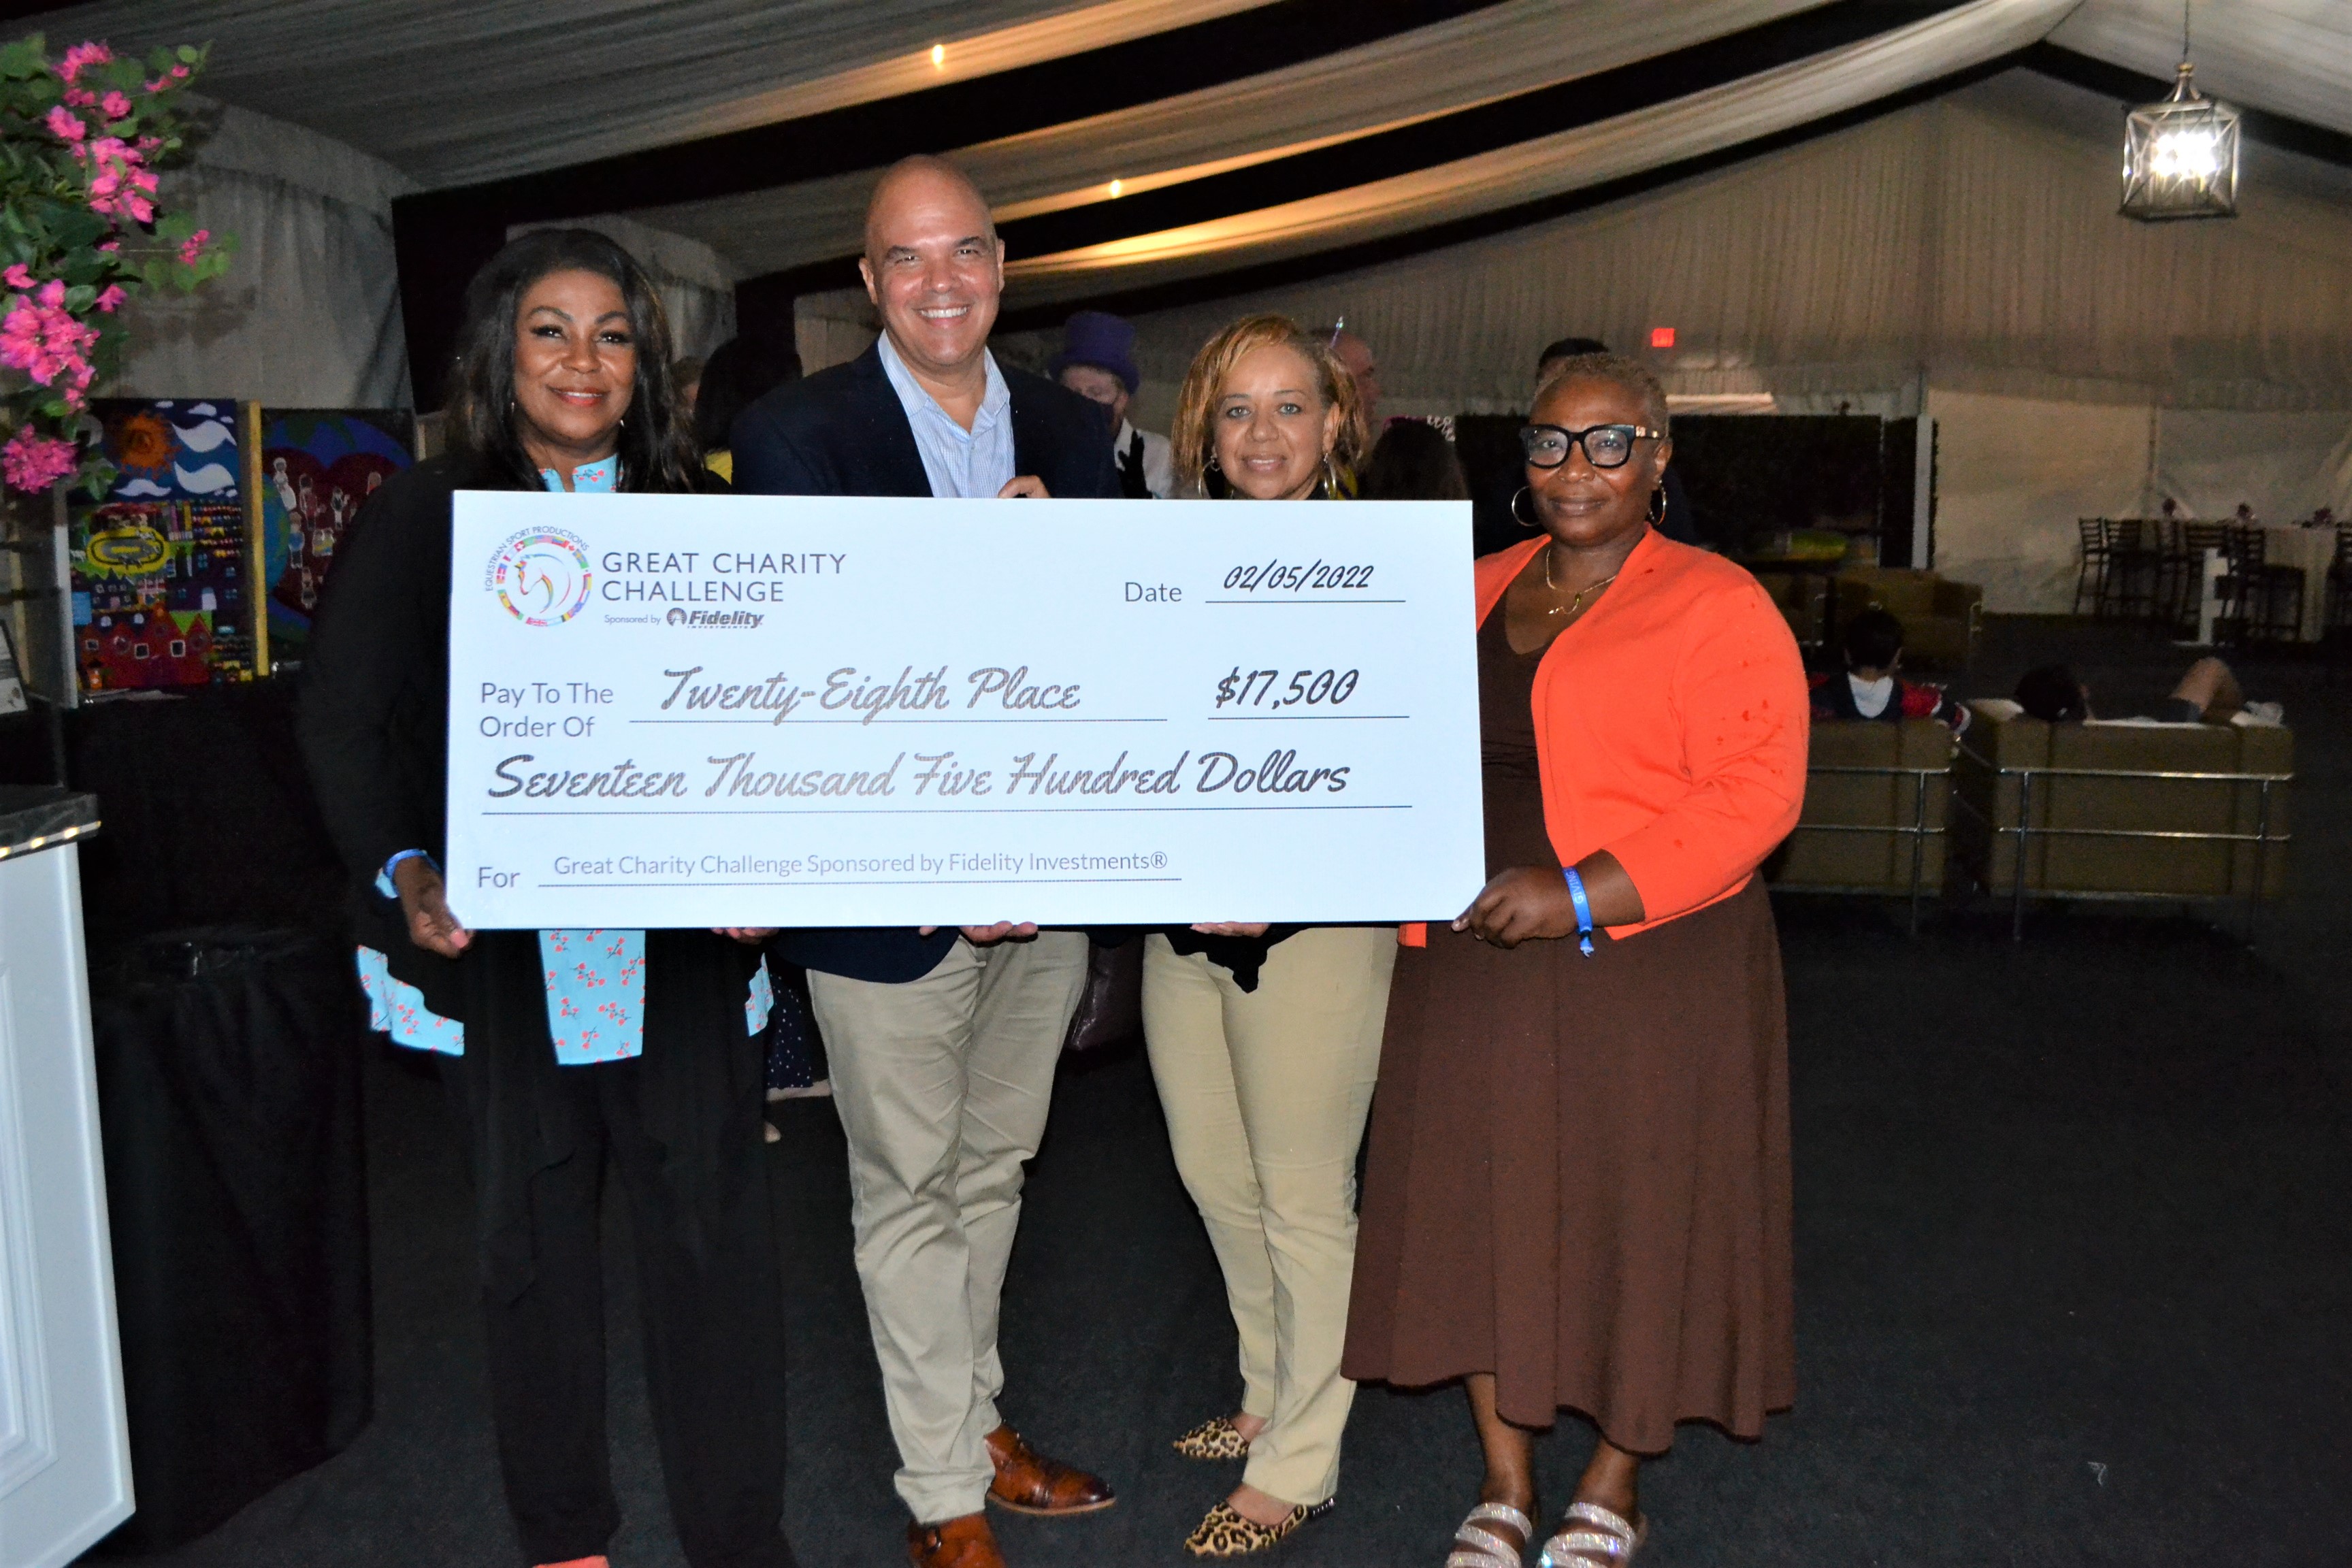 FoundCare Receives $17,500 at Great Charity Challenge Event